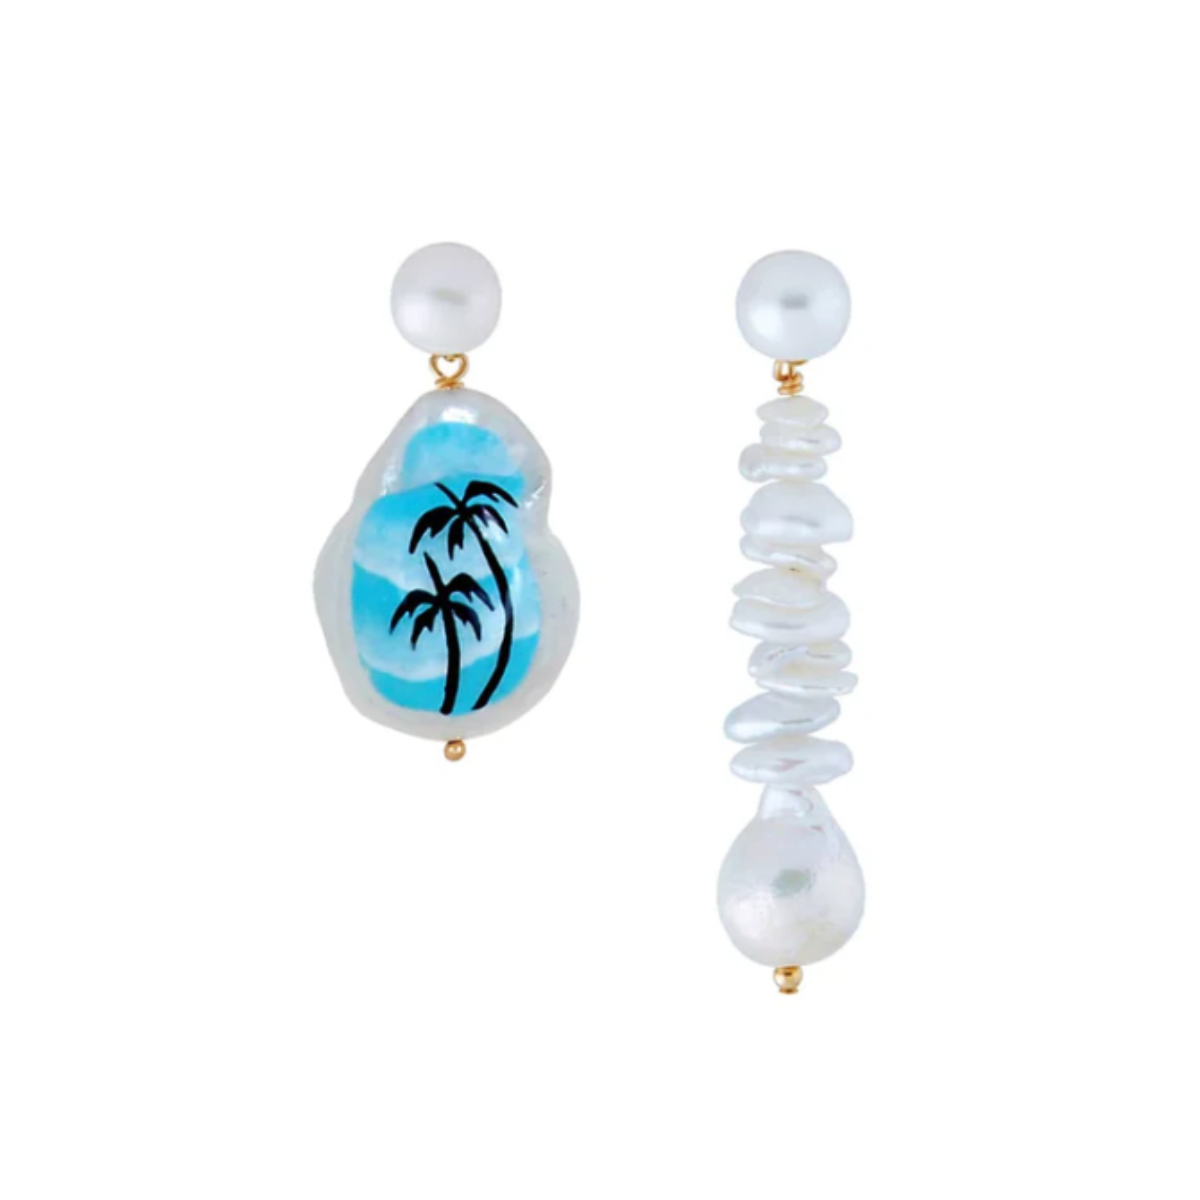 Zorrostuff Hand Painted Palm Tree Design on Freshwater Pearl Earrings